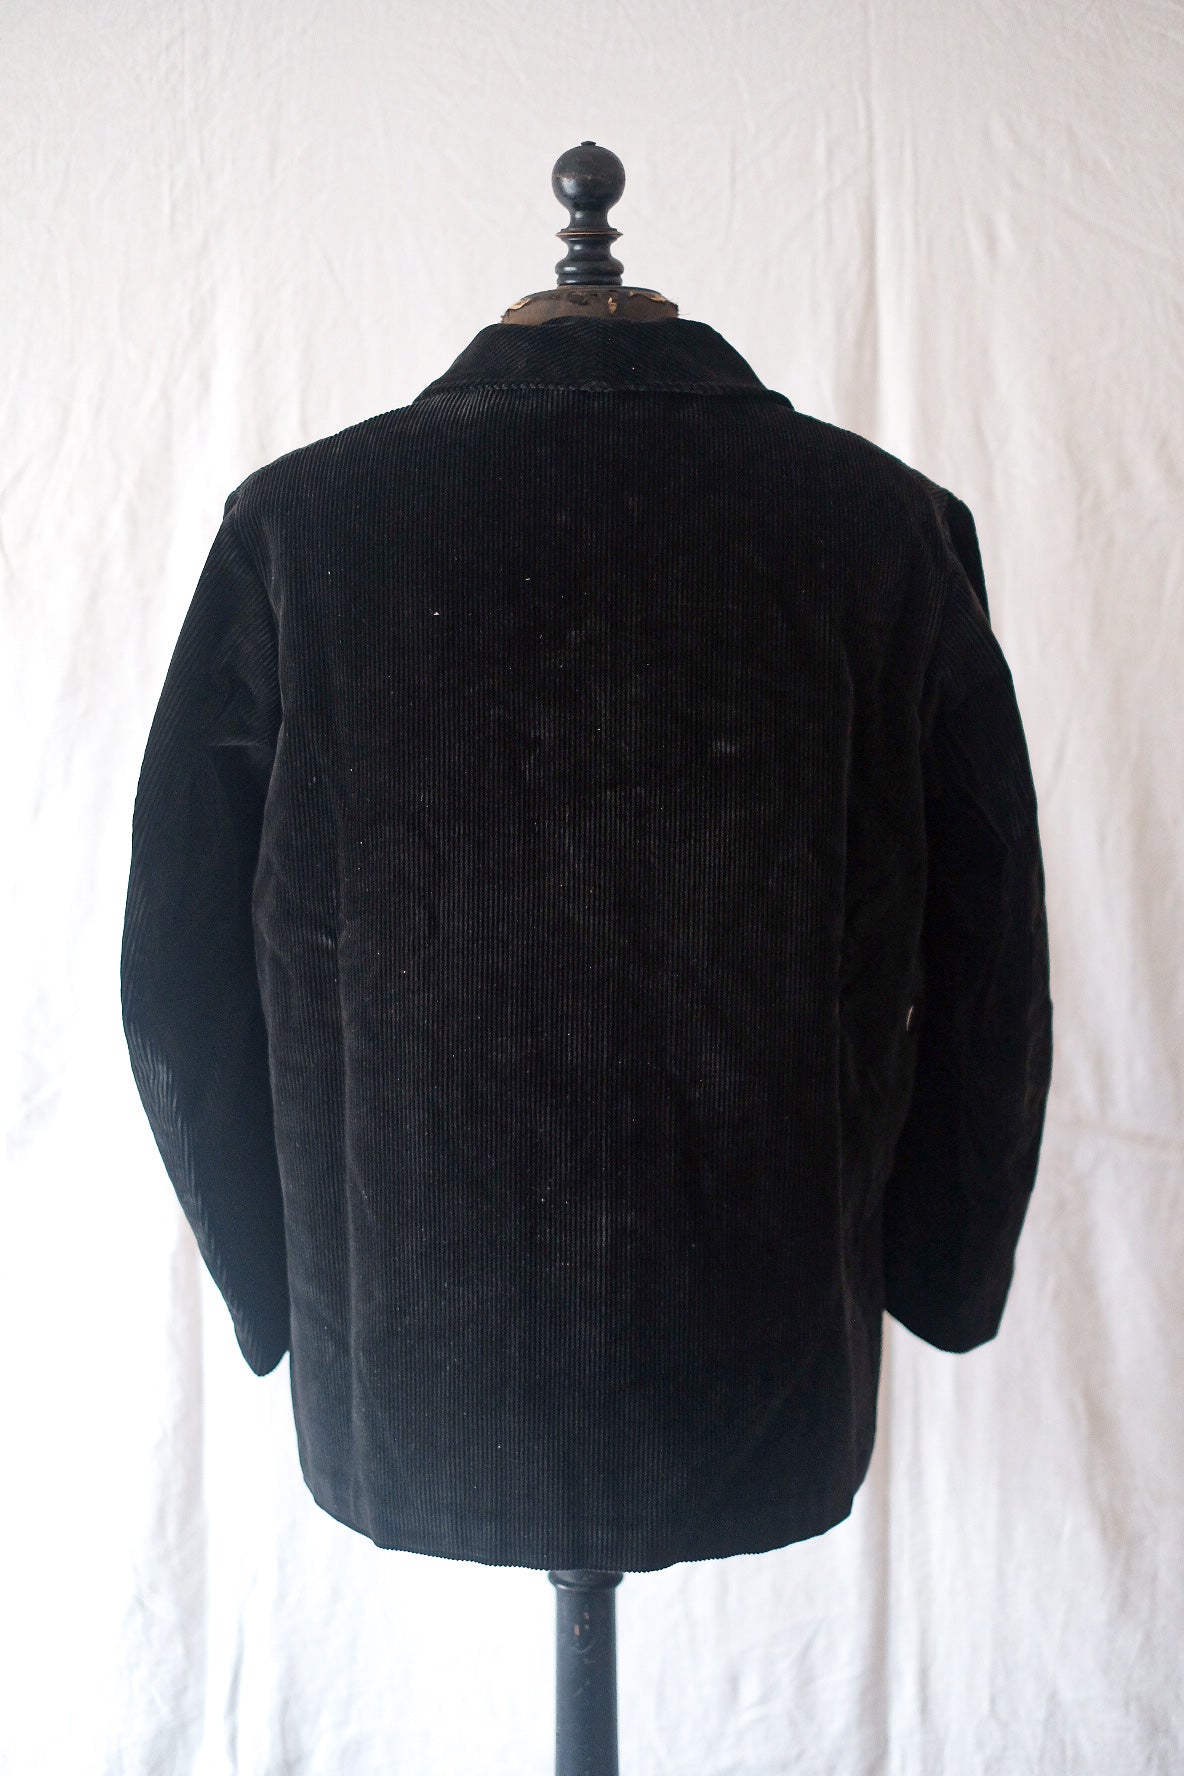 [~ 40's] French Vintage Black Corduroy Hunting Jacket "Dead Stock"